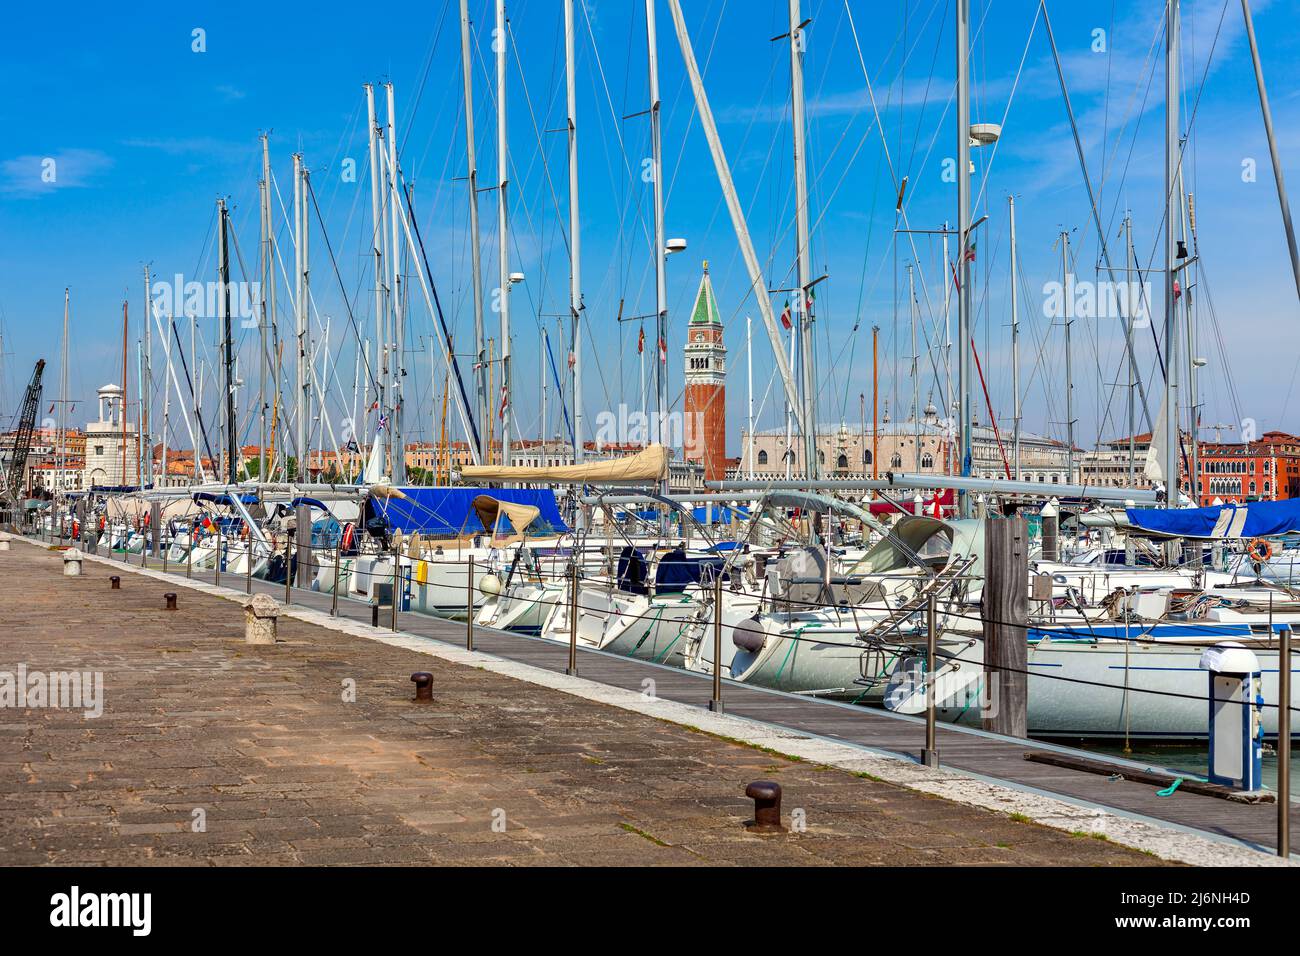 San Marco Campanile as seen through the masts of white yachts moored at small marina on San Giorgio Maggiore island in Venice, Italy. Stock Photo